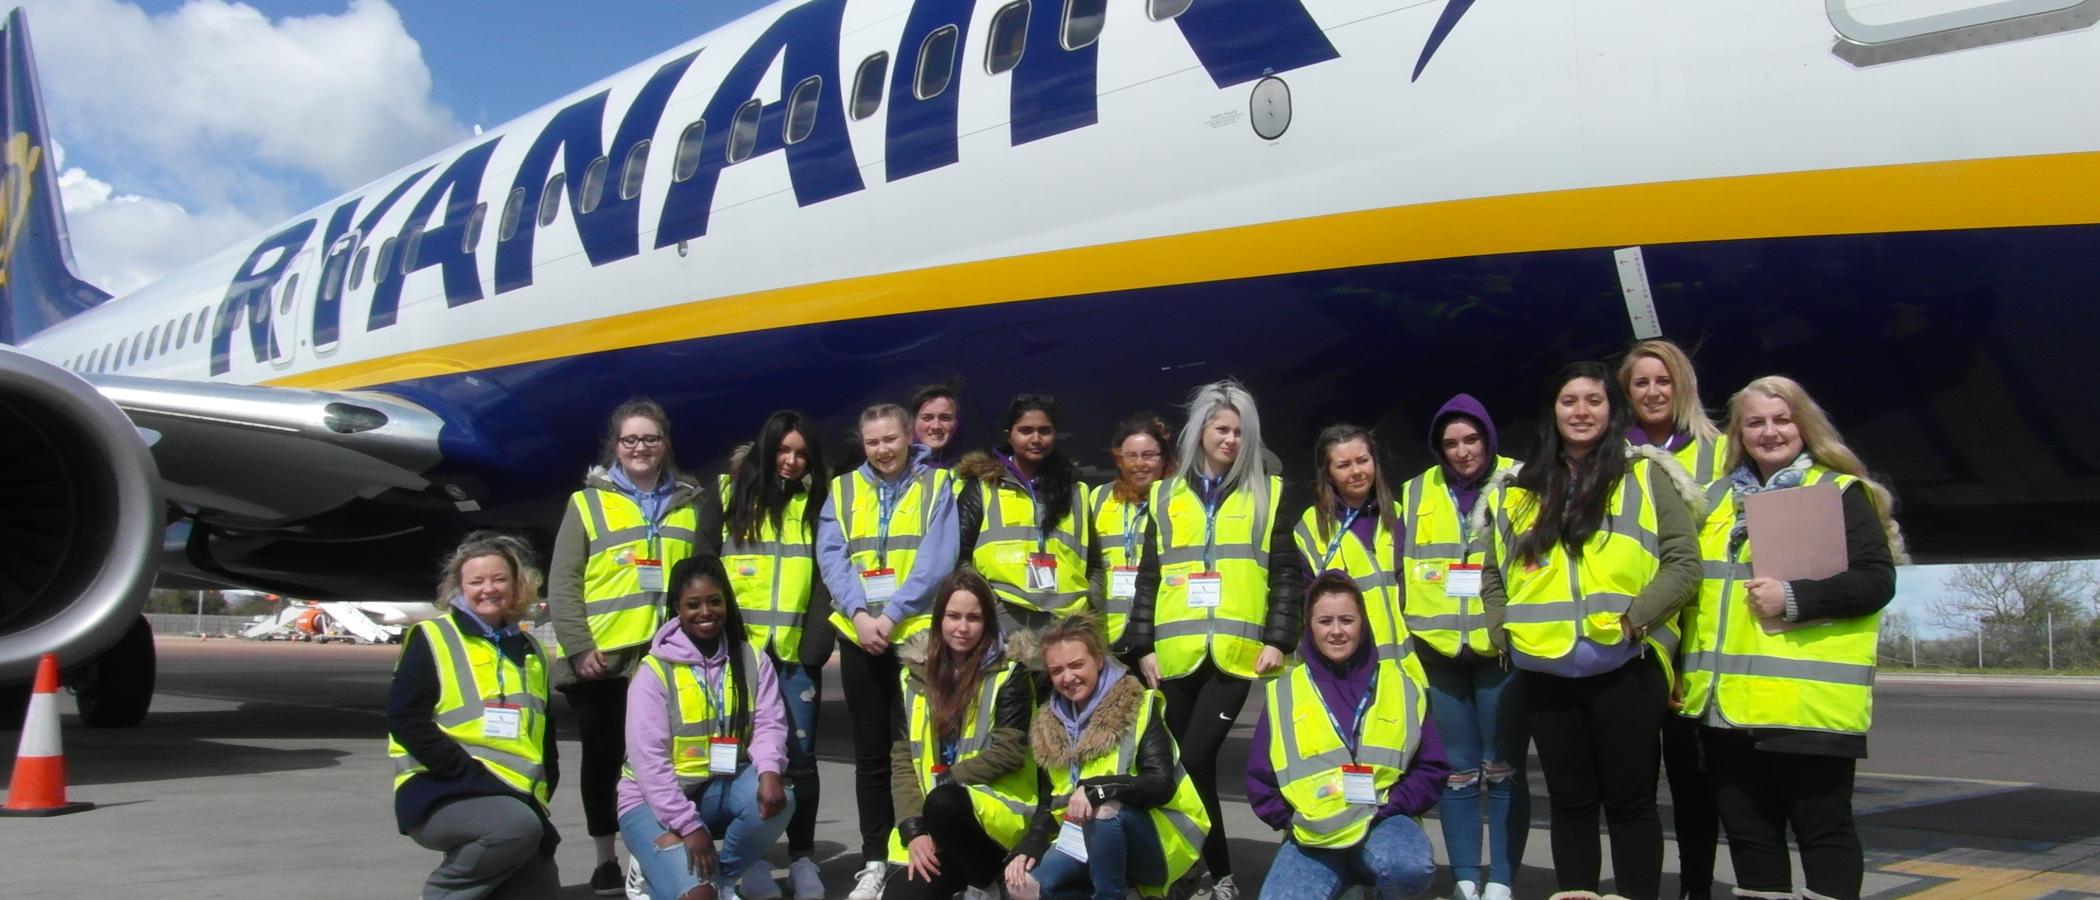 Airport work experience inspires students